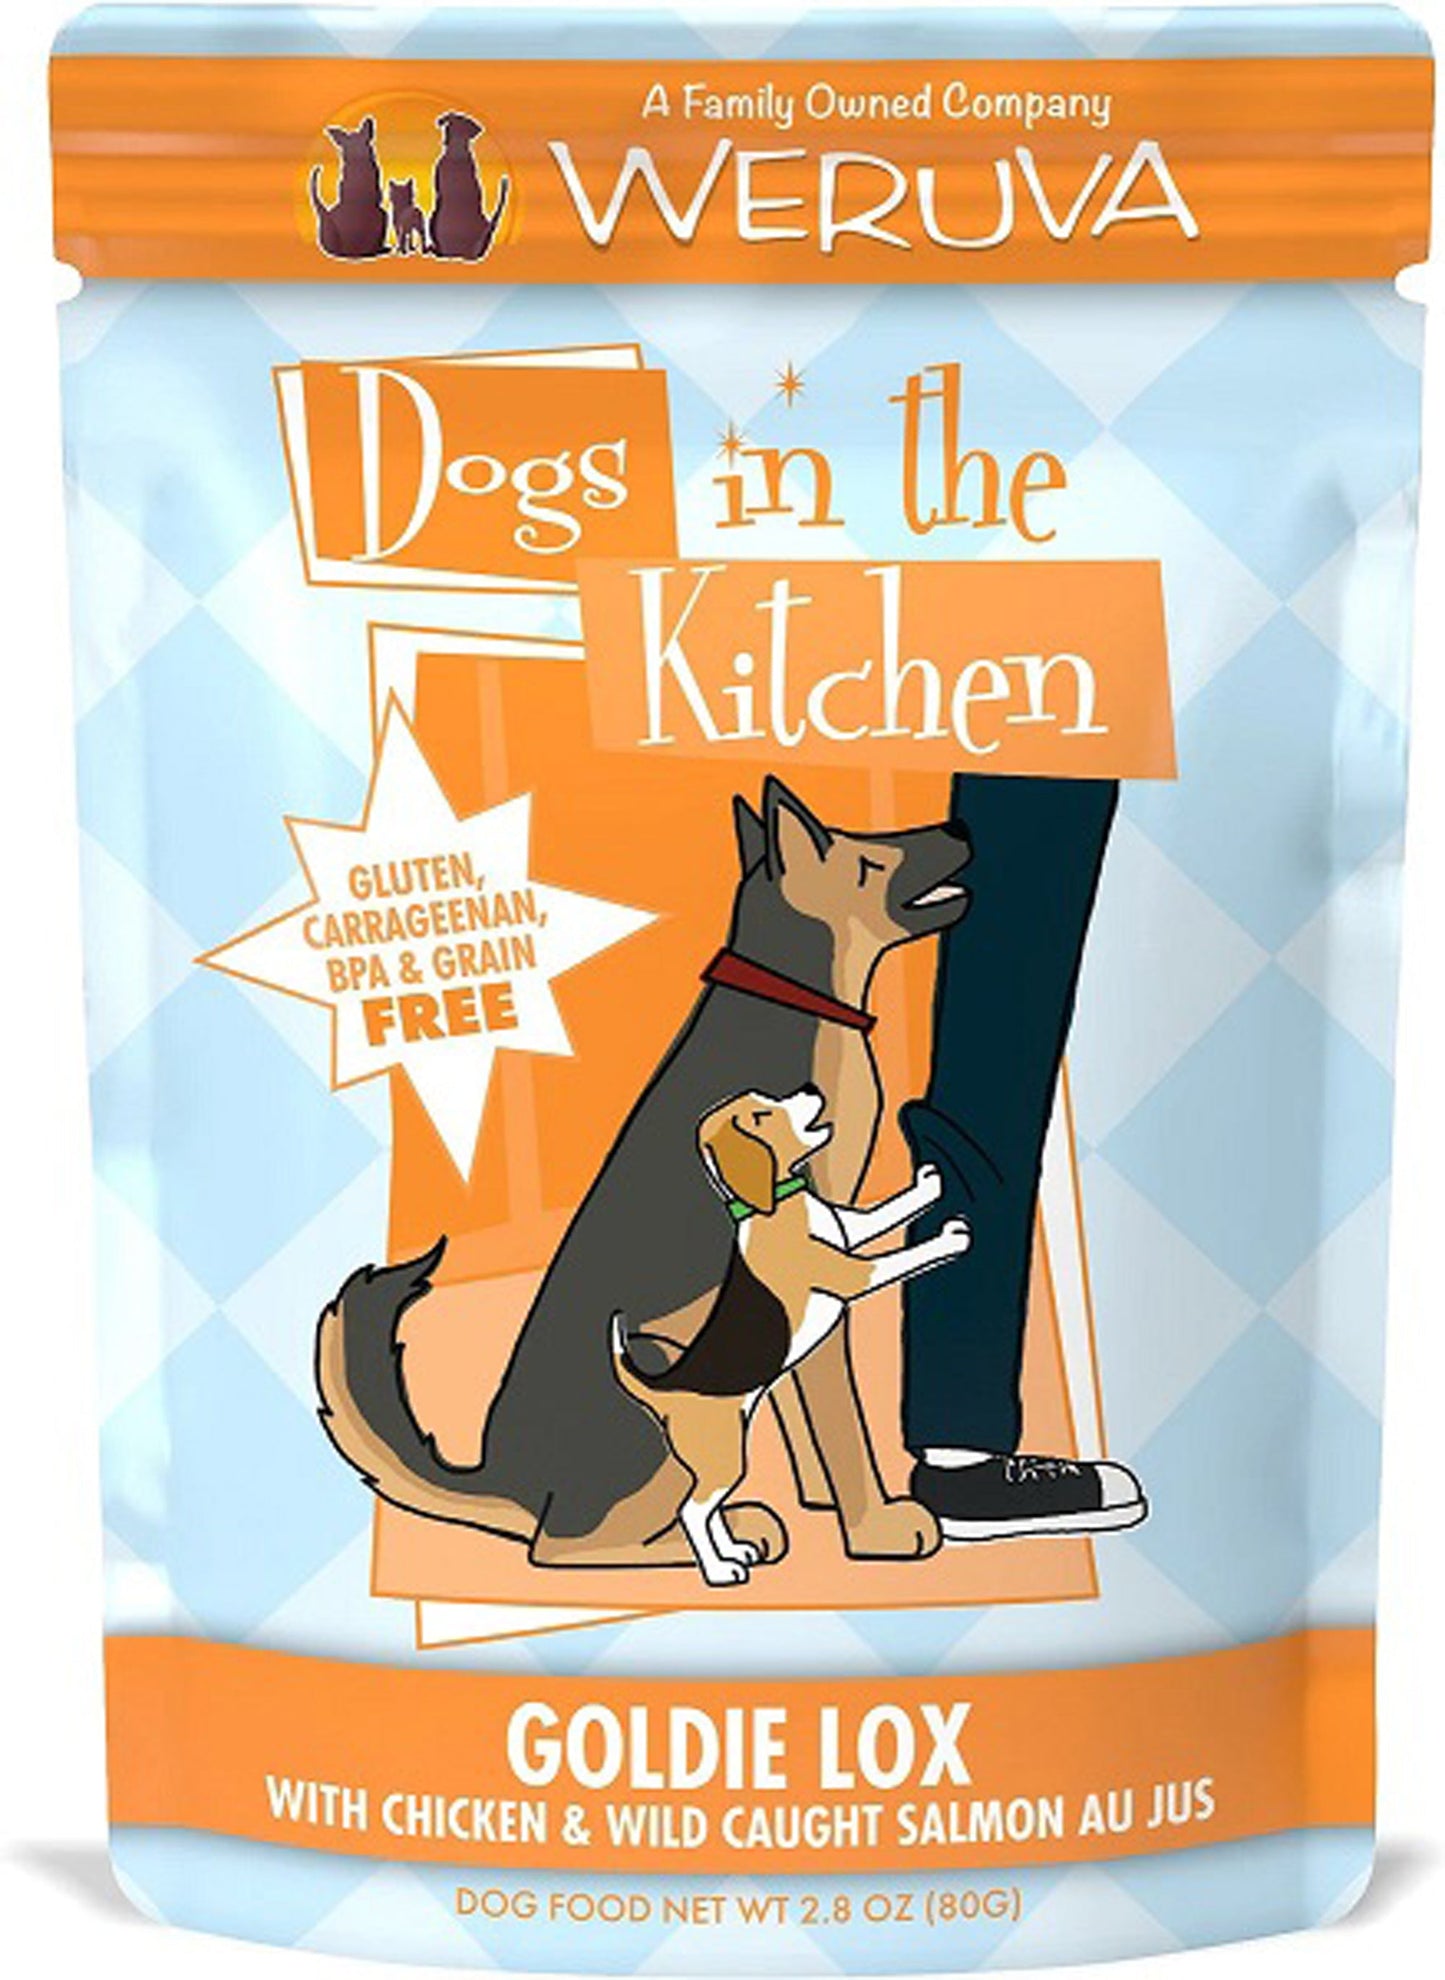 Dogs In The Kitchen Dog Goldie Lox With Chicken & Wild-Caught Salmon Au Jus 2.8oz. Pouch (Case of 12)